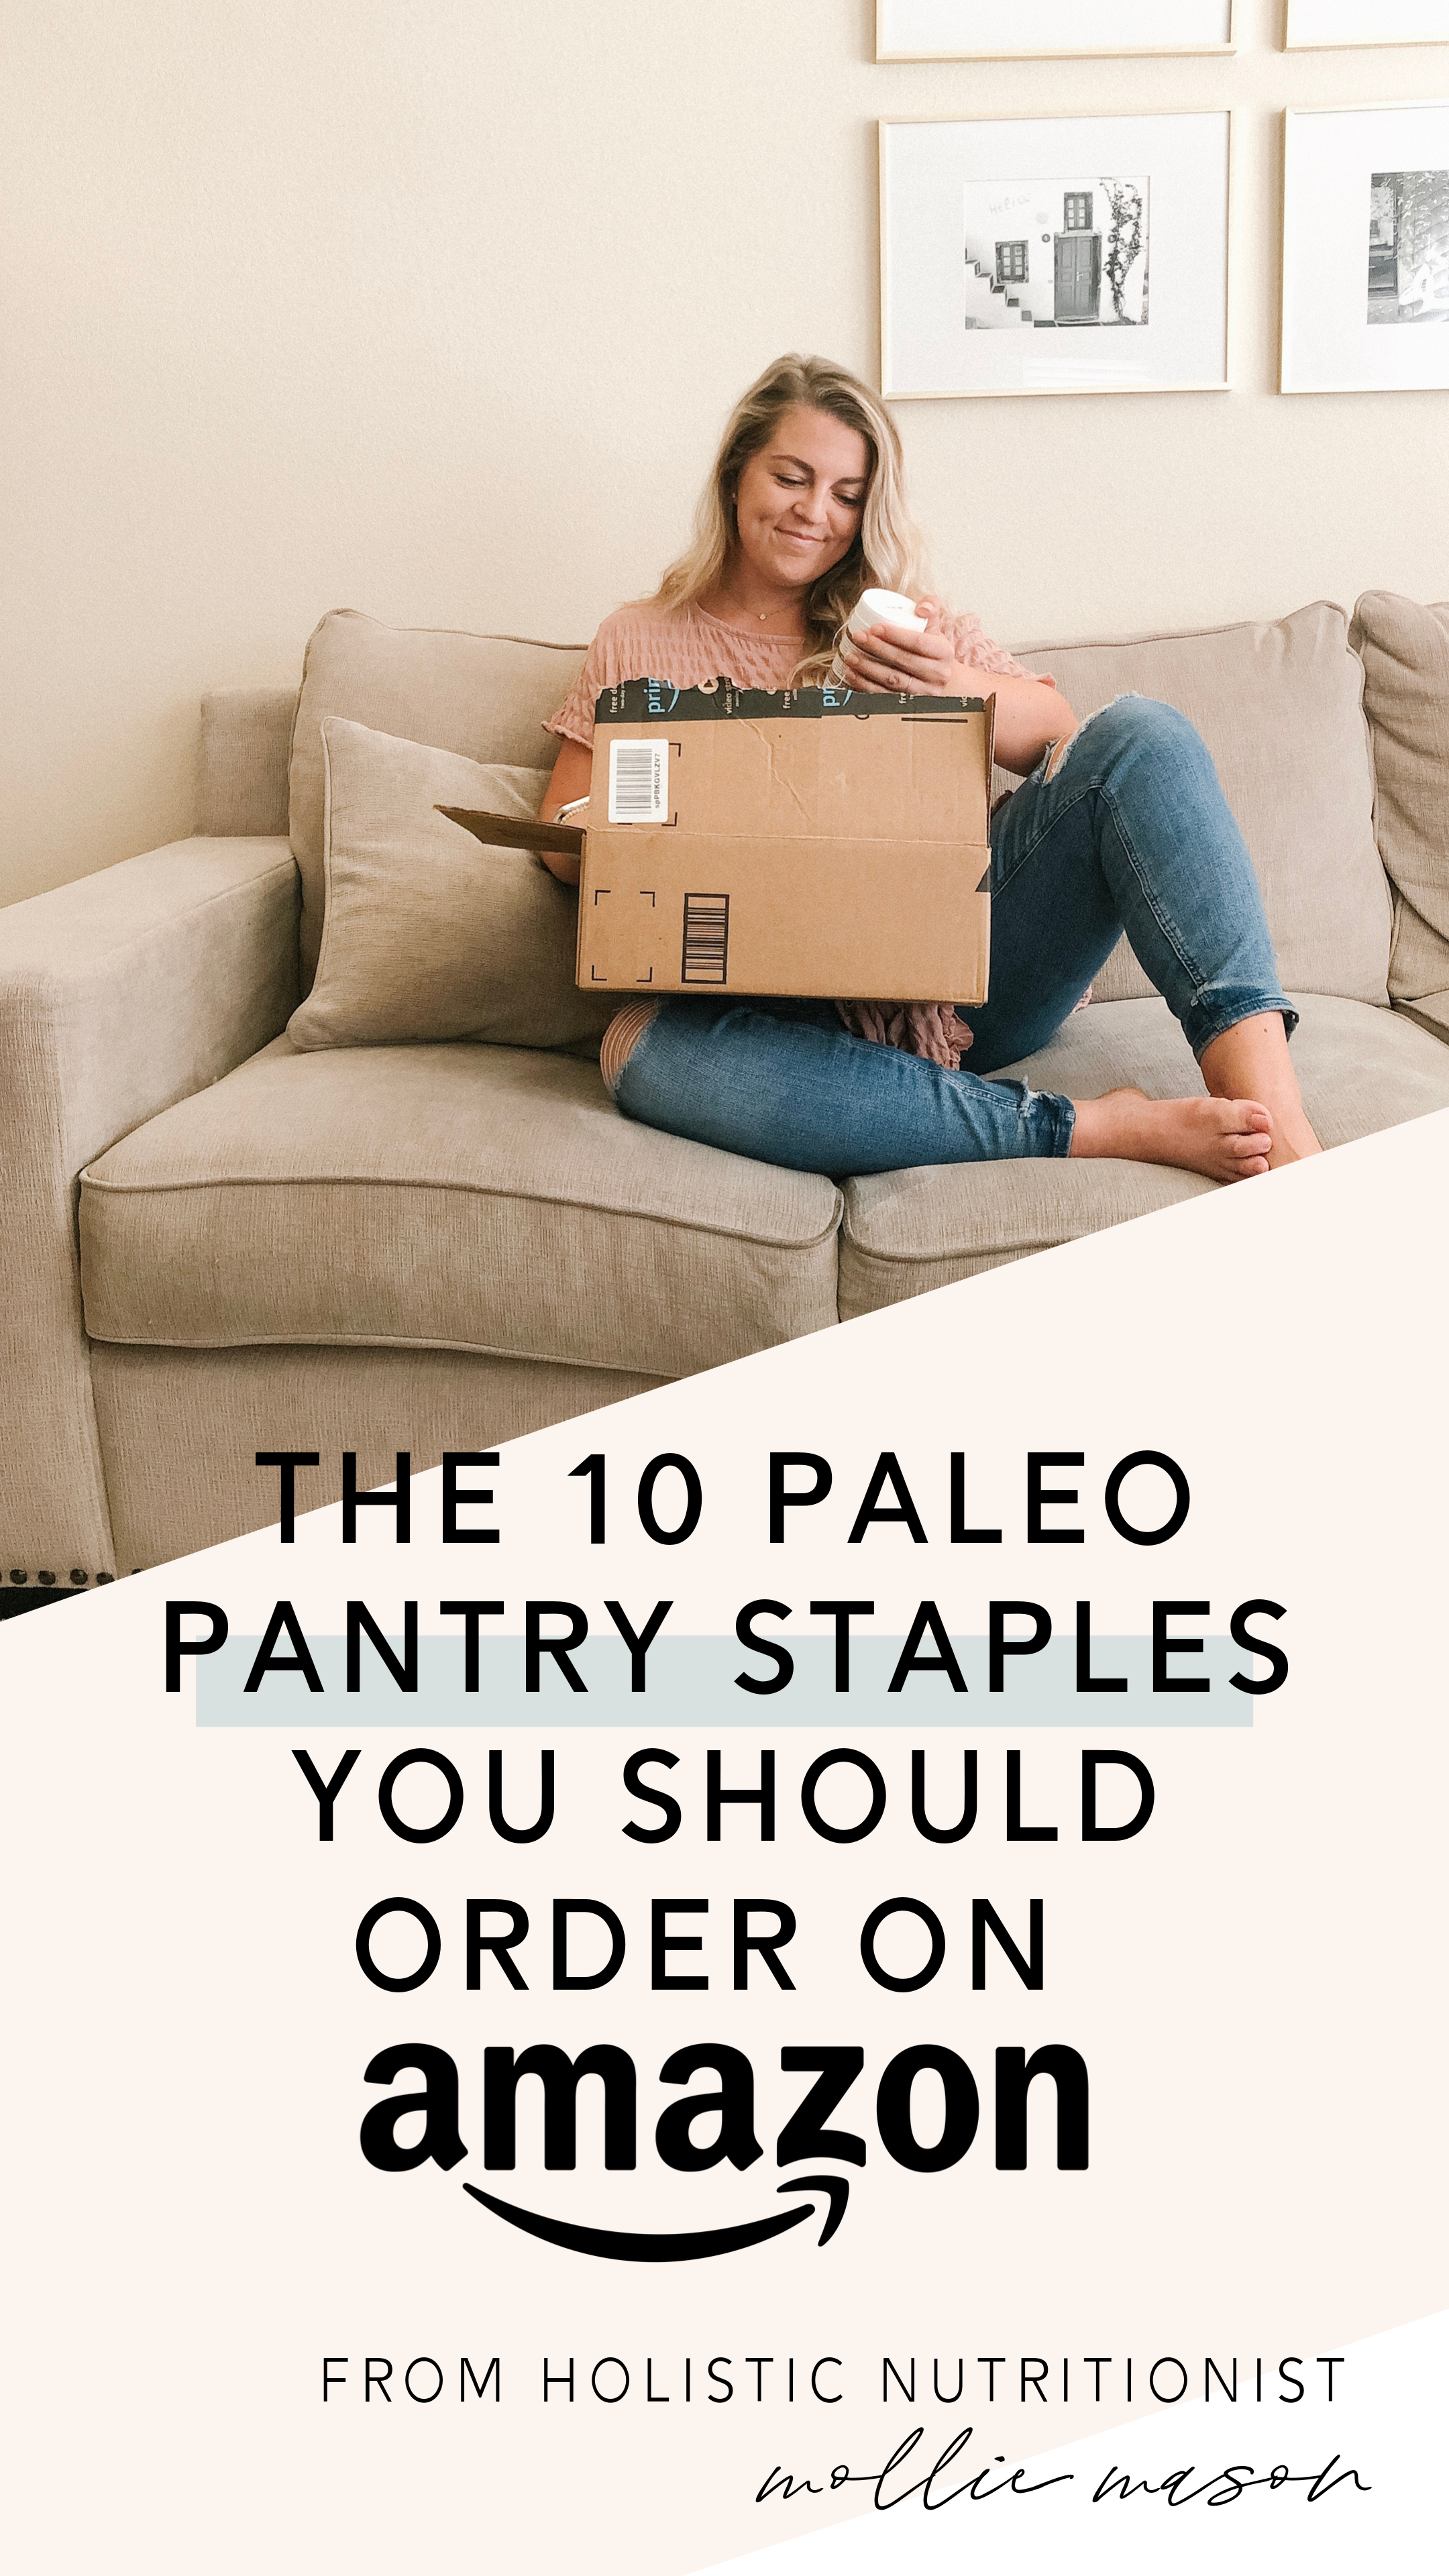 paleo shopping list | paleo pantry staples you can order from amazon | amazon.com paleo grocery list 